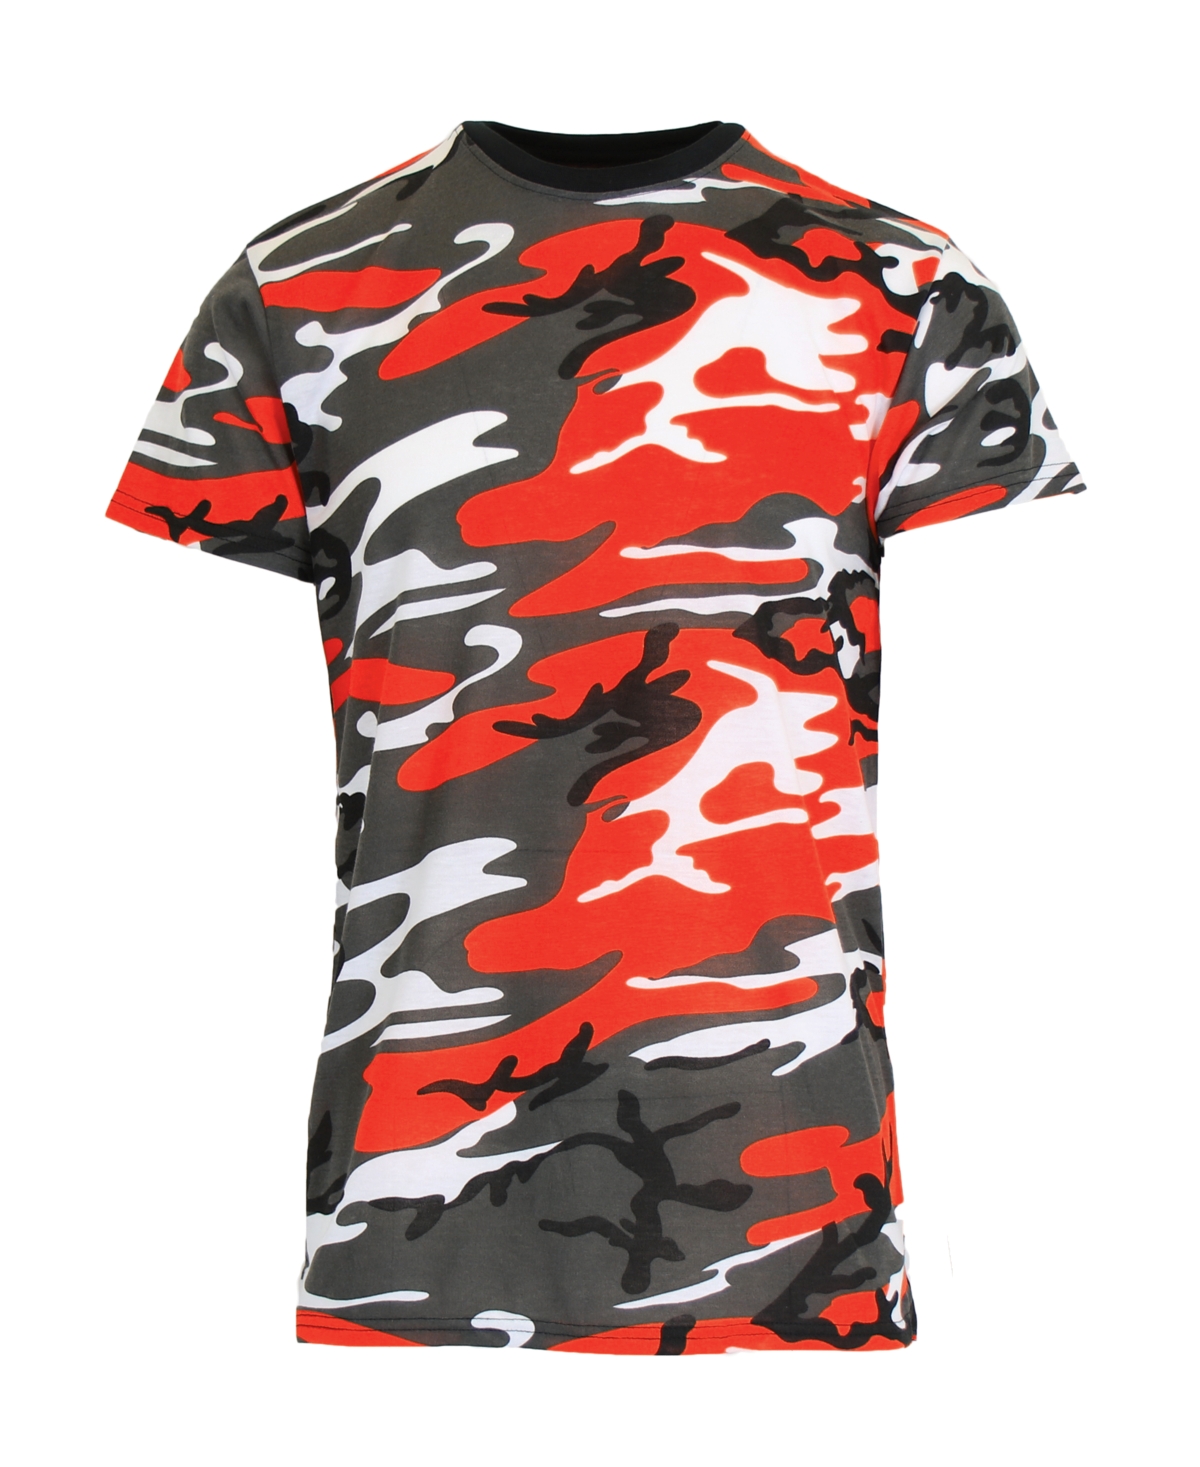 Galaxy By Harvic Men's Camo Printed Short Sleeve Crew Neck T-shirt In Red Camo